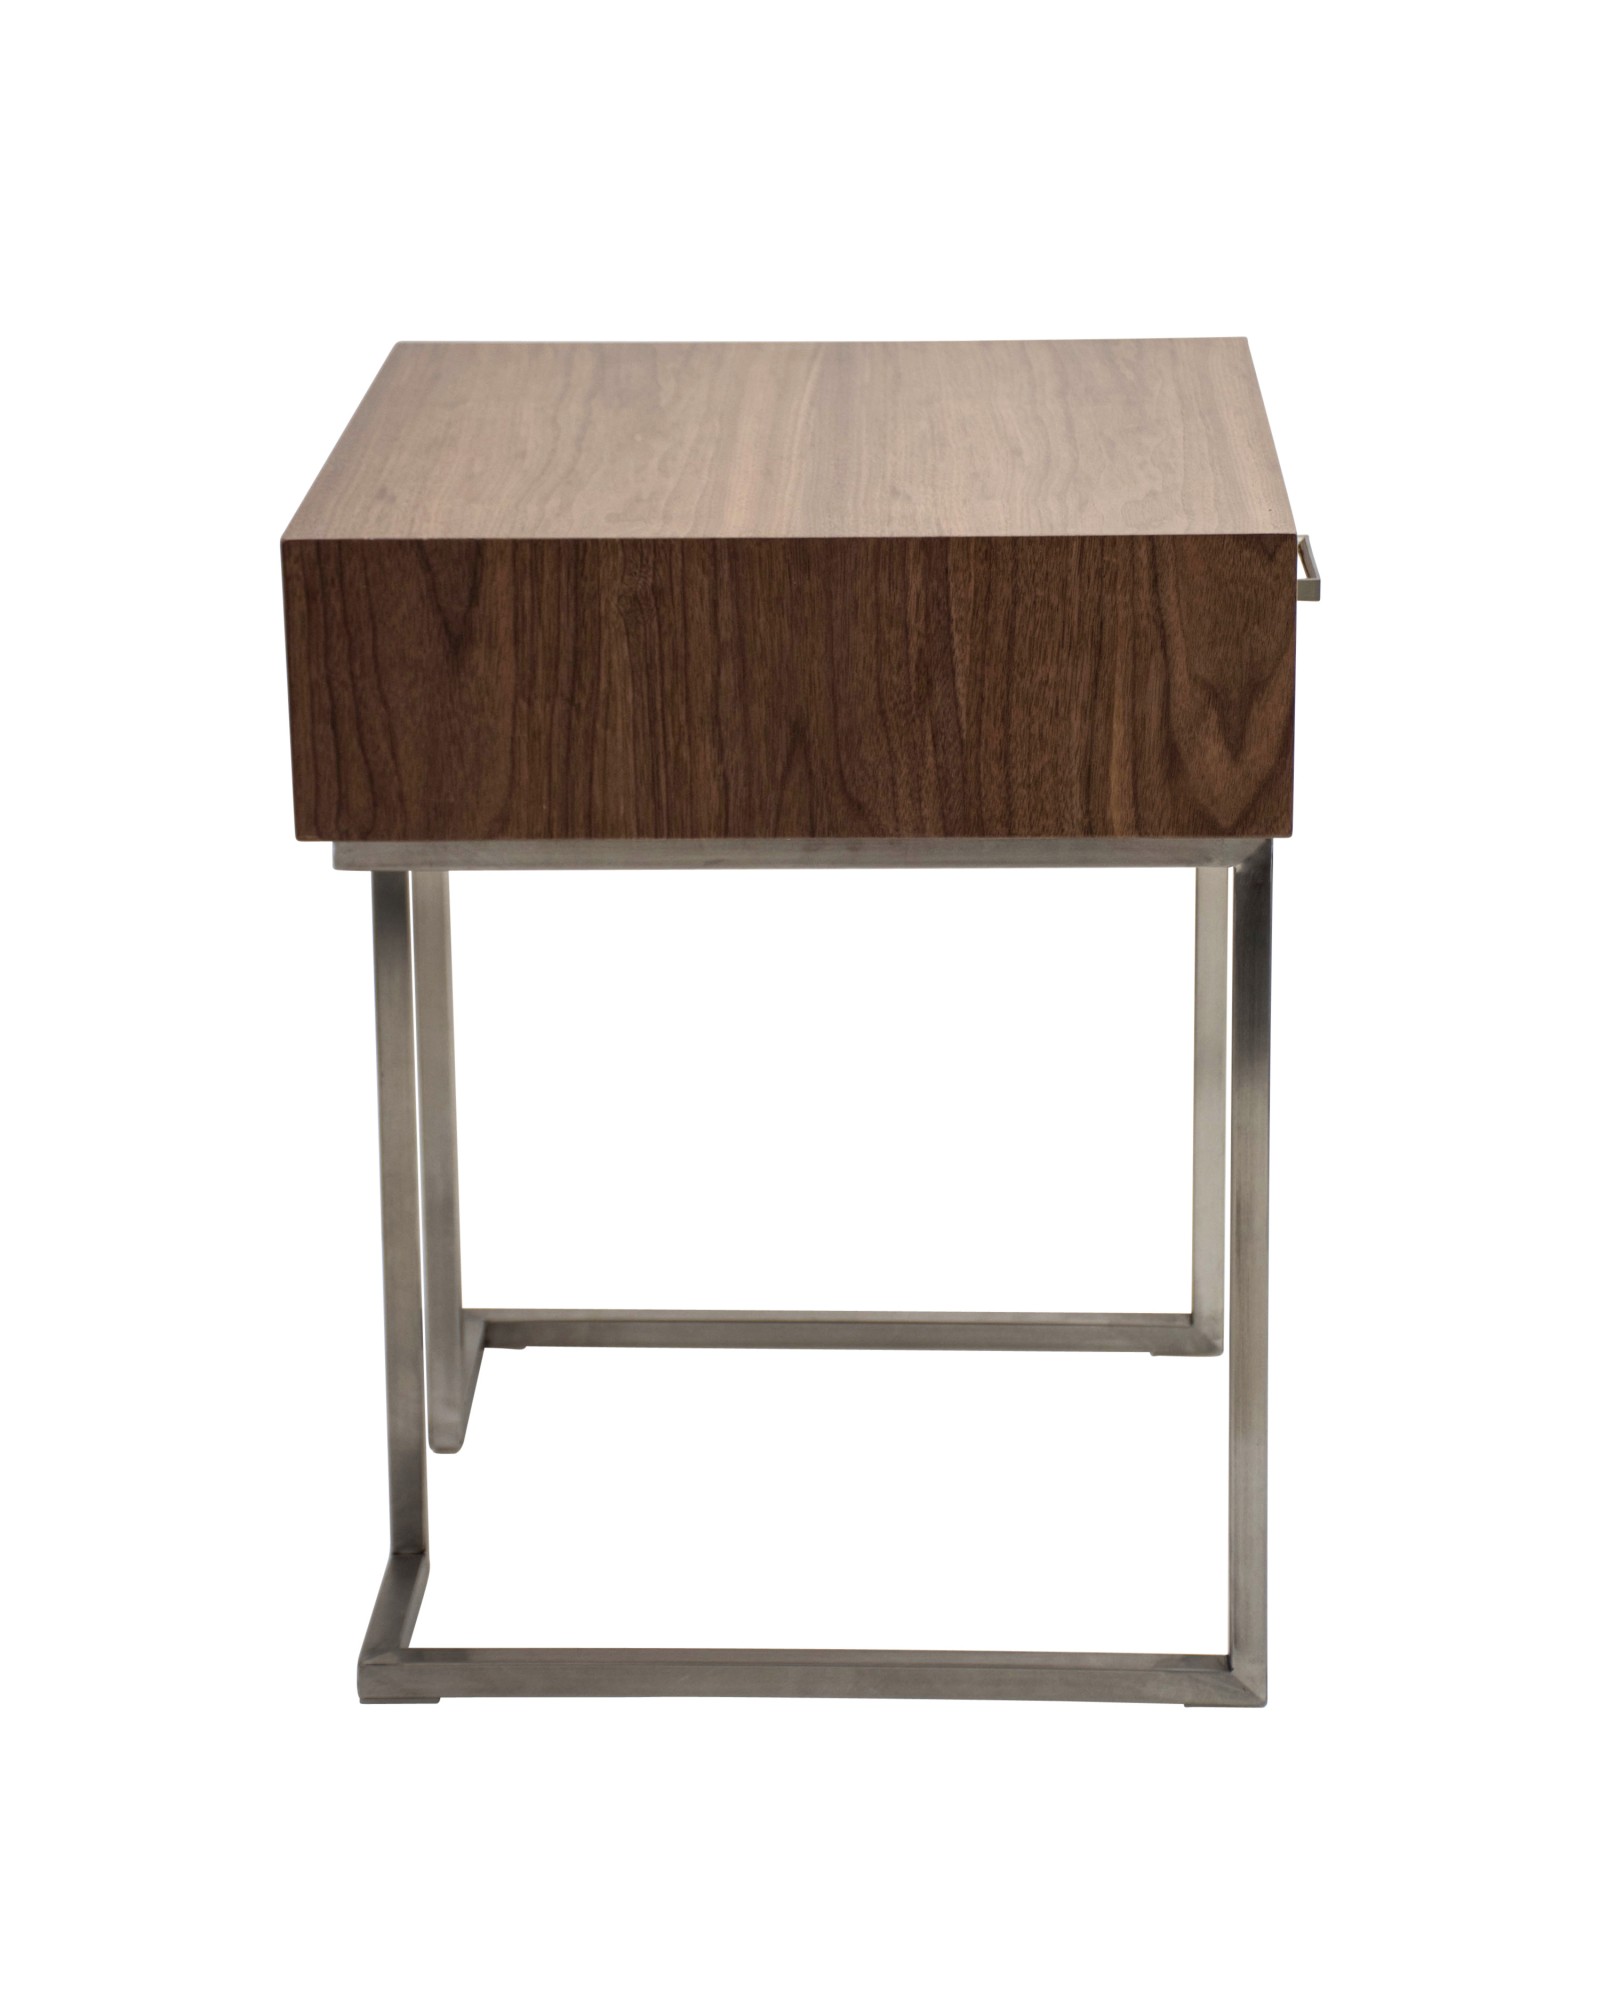 Roman Contemporary End Table in Walnut Wood and Stainless Steel